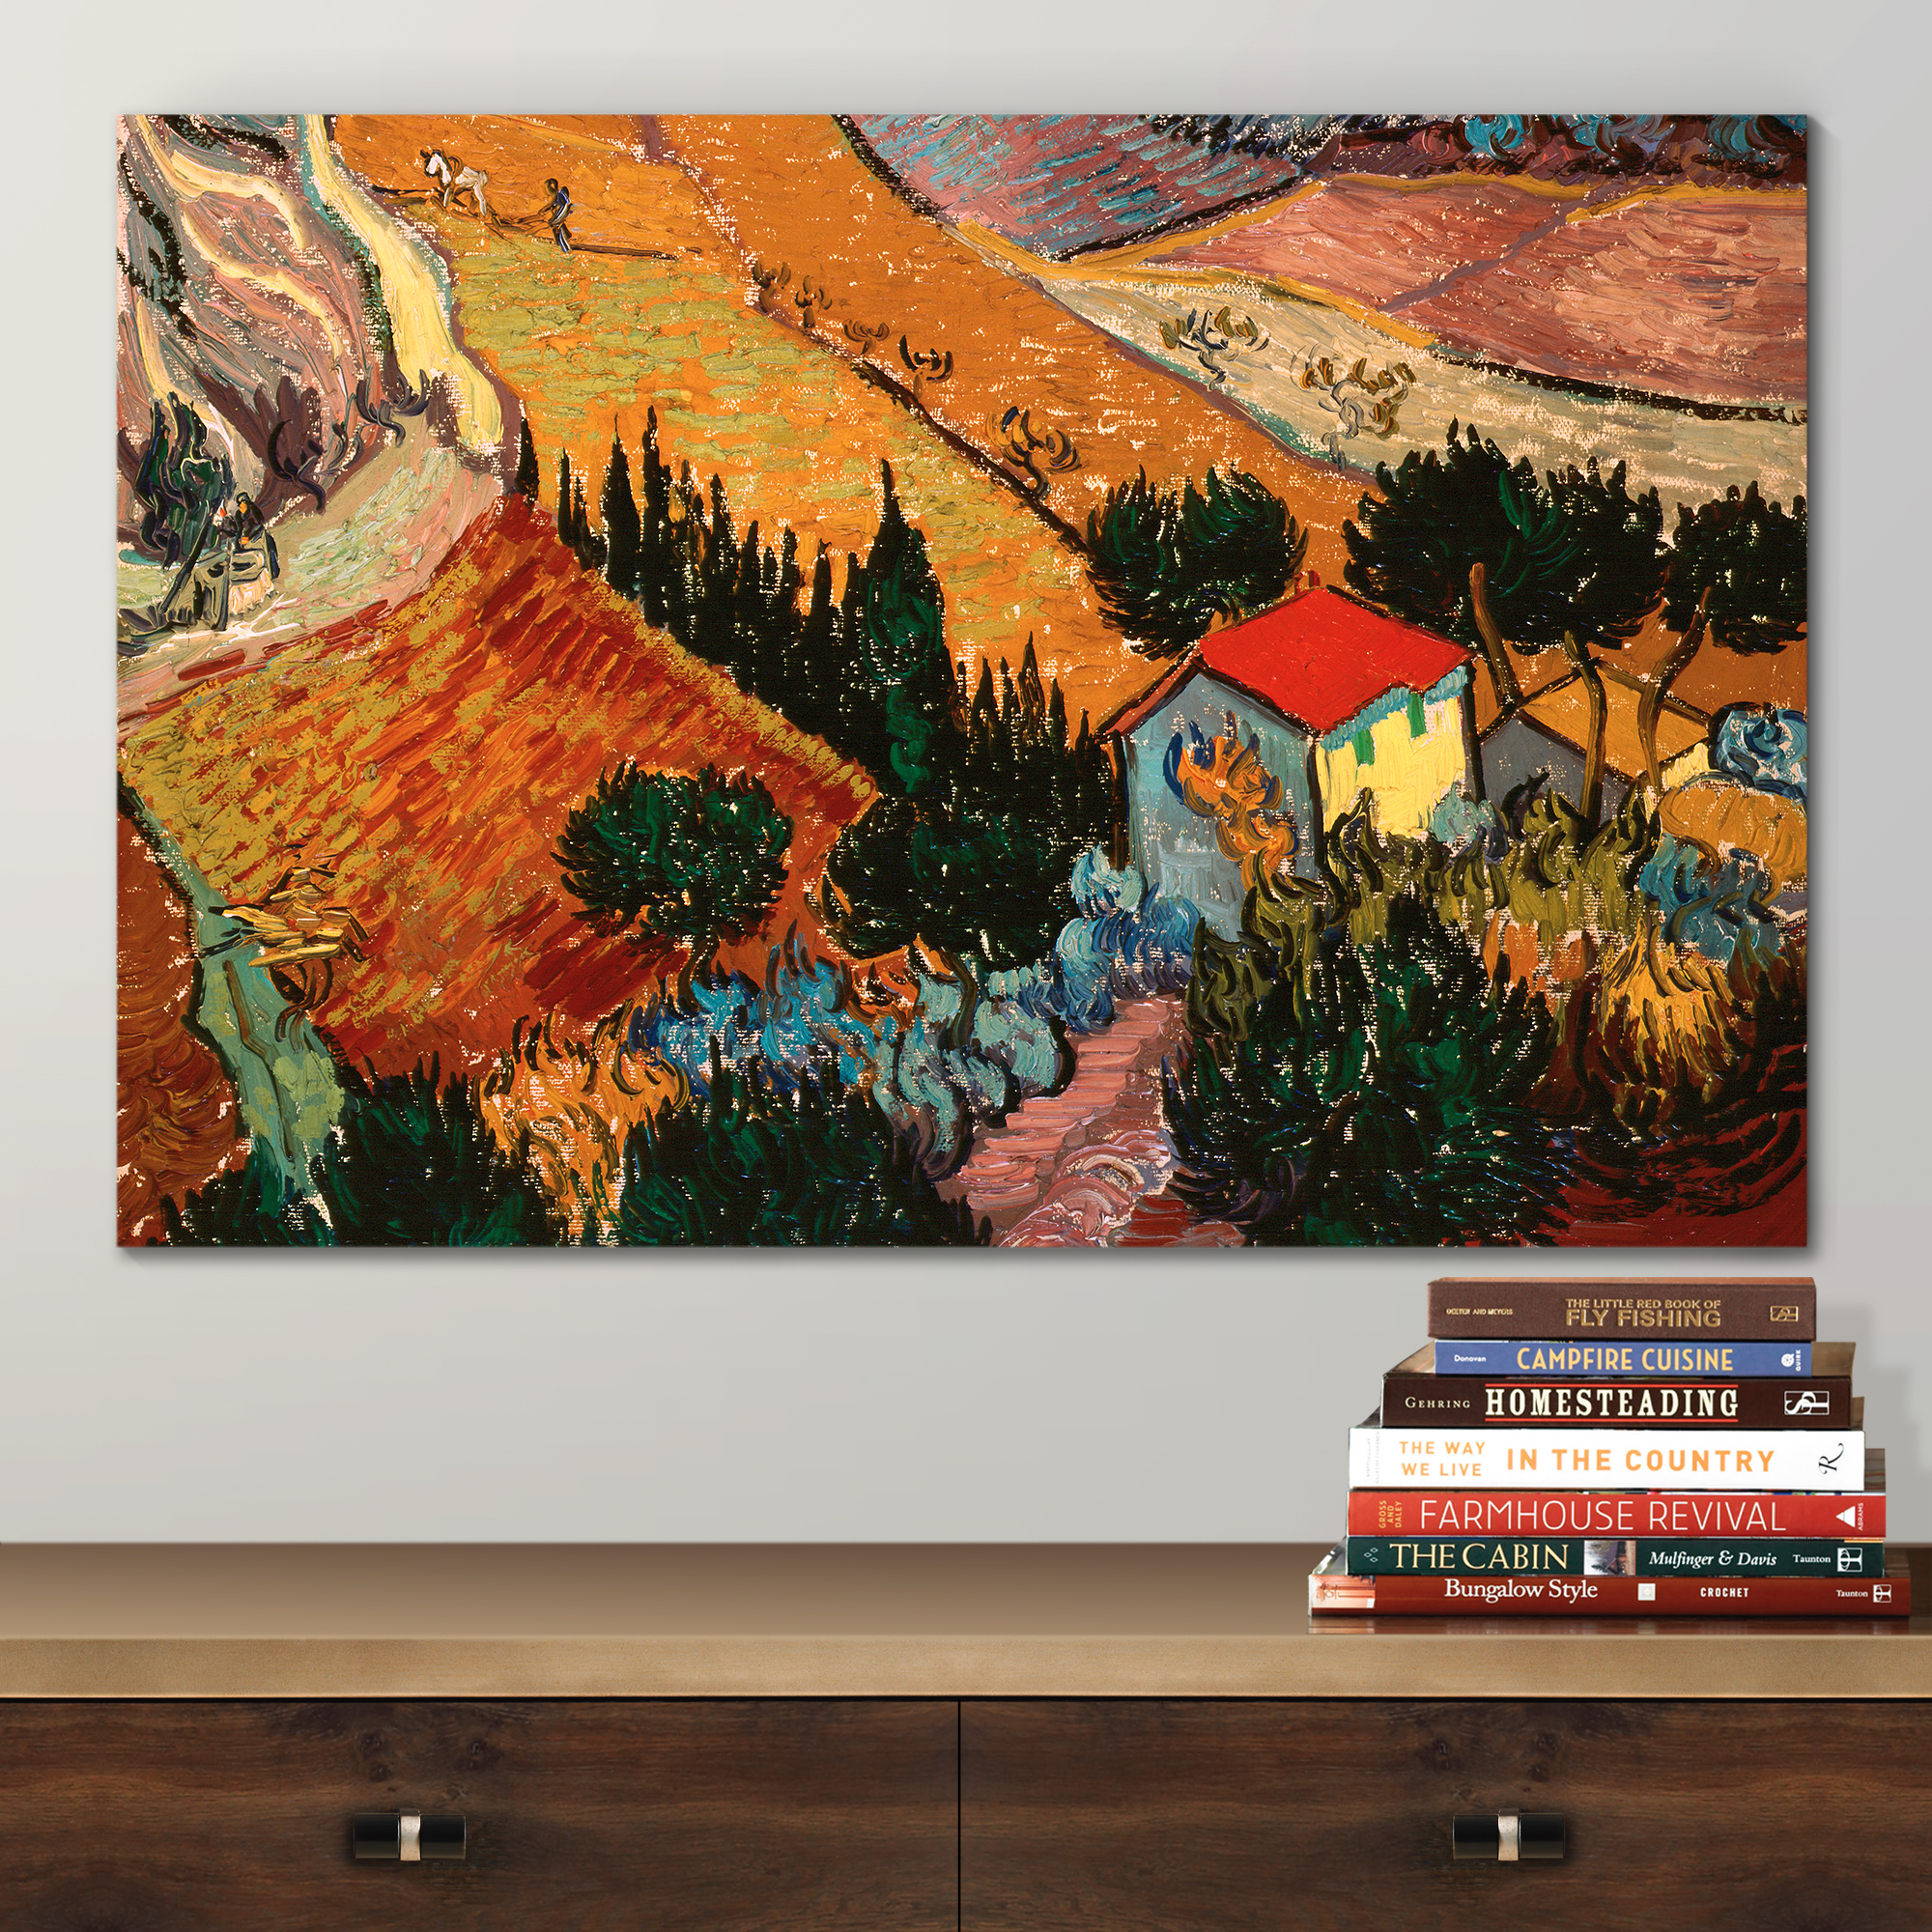 Valley with Ploughman Seen from Above by Vincent Van Gogh - Canvas Print Wall Art Famous Painting Reproduction - 16